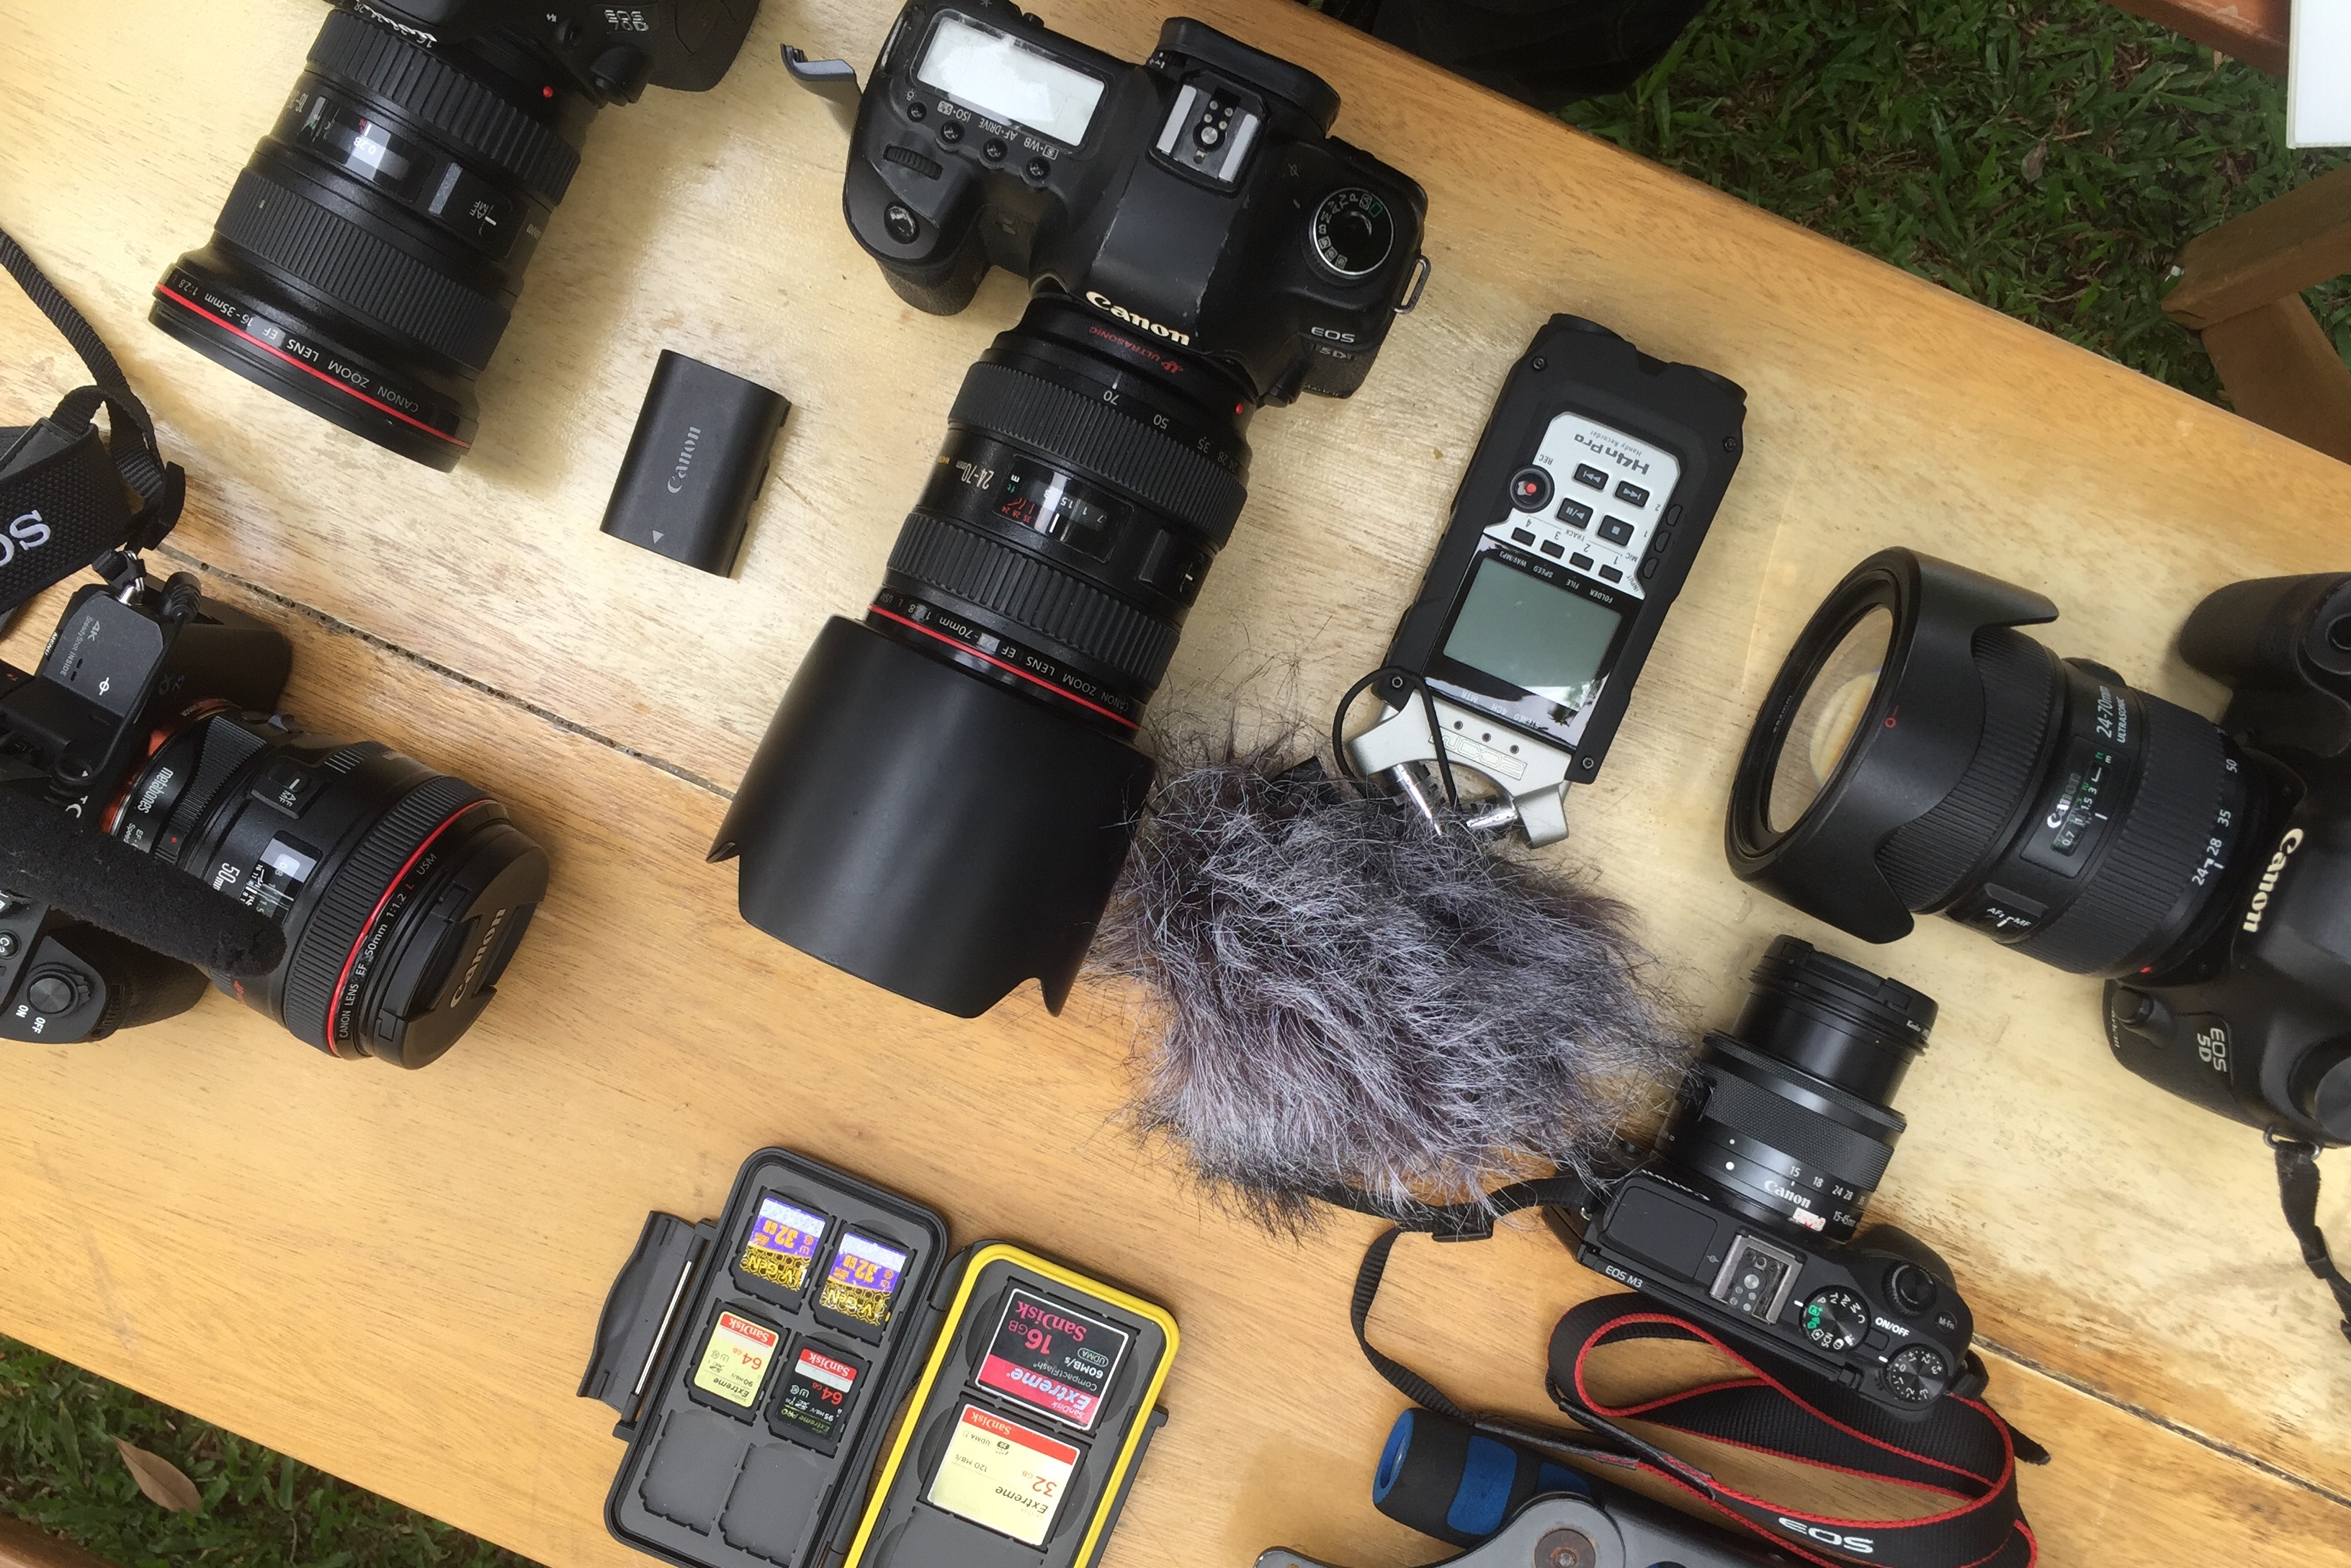 Camera gear exploration: Reviewing and rating photography equipment